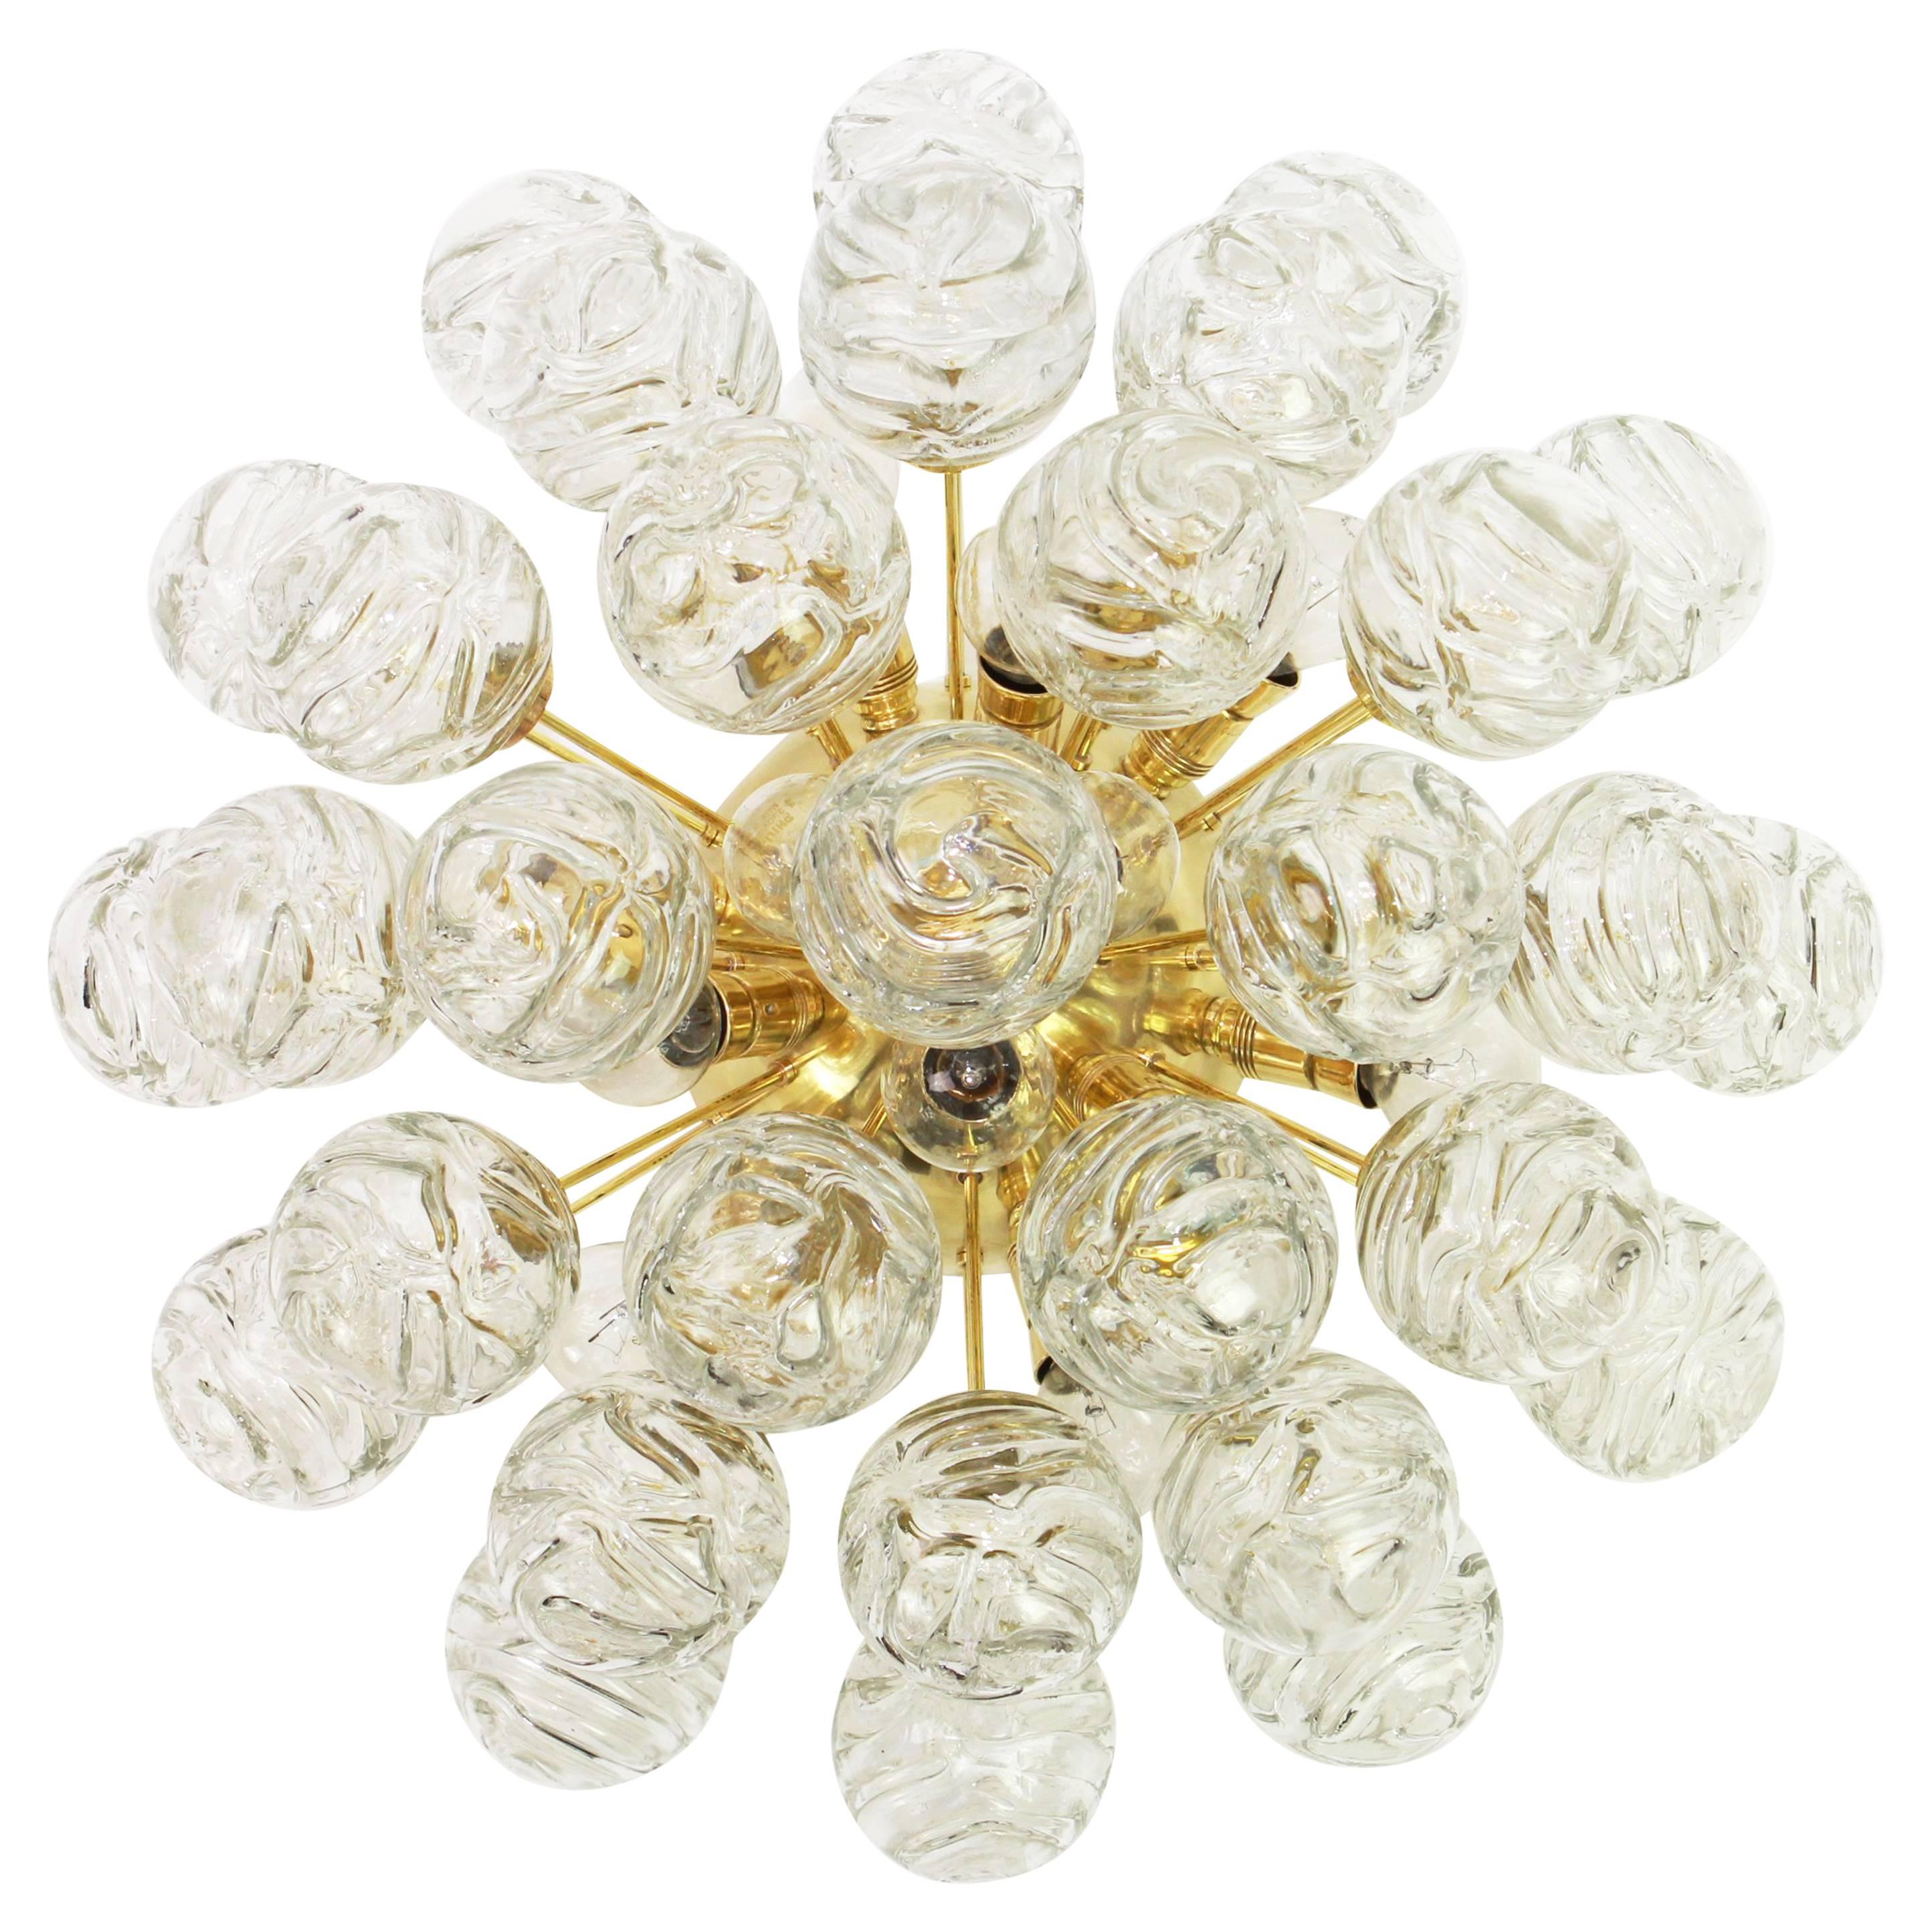 Spectacular Sputnik flush mount with glass snowballs designed by Doria, Germany, 1970s
All glass balls are in good condition.
It needs 12 small size bulbs (E-14 bulbs) up to 40 watts each and is compatible with the US /UK/. standards.

2 items